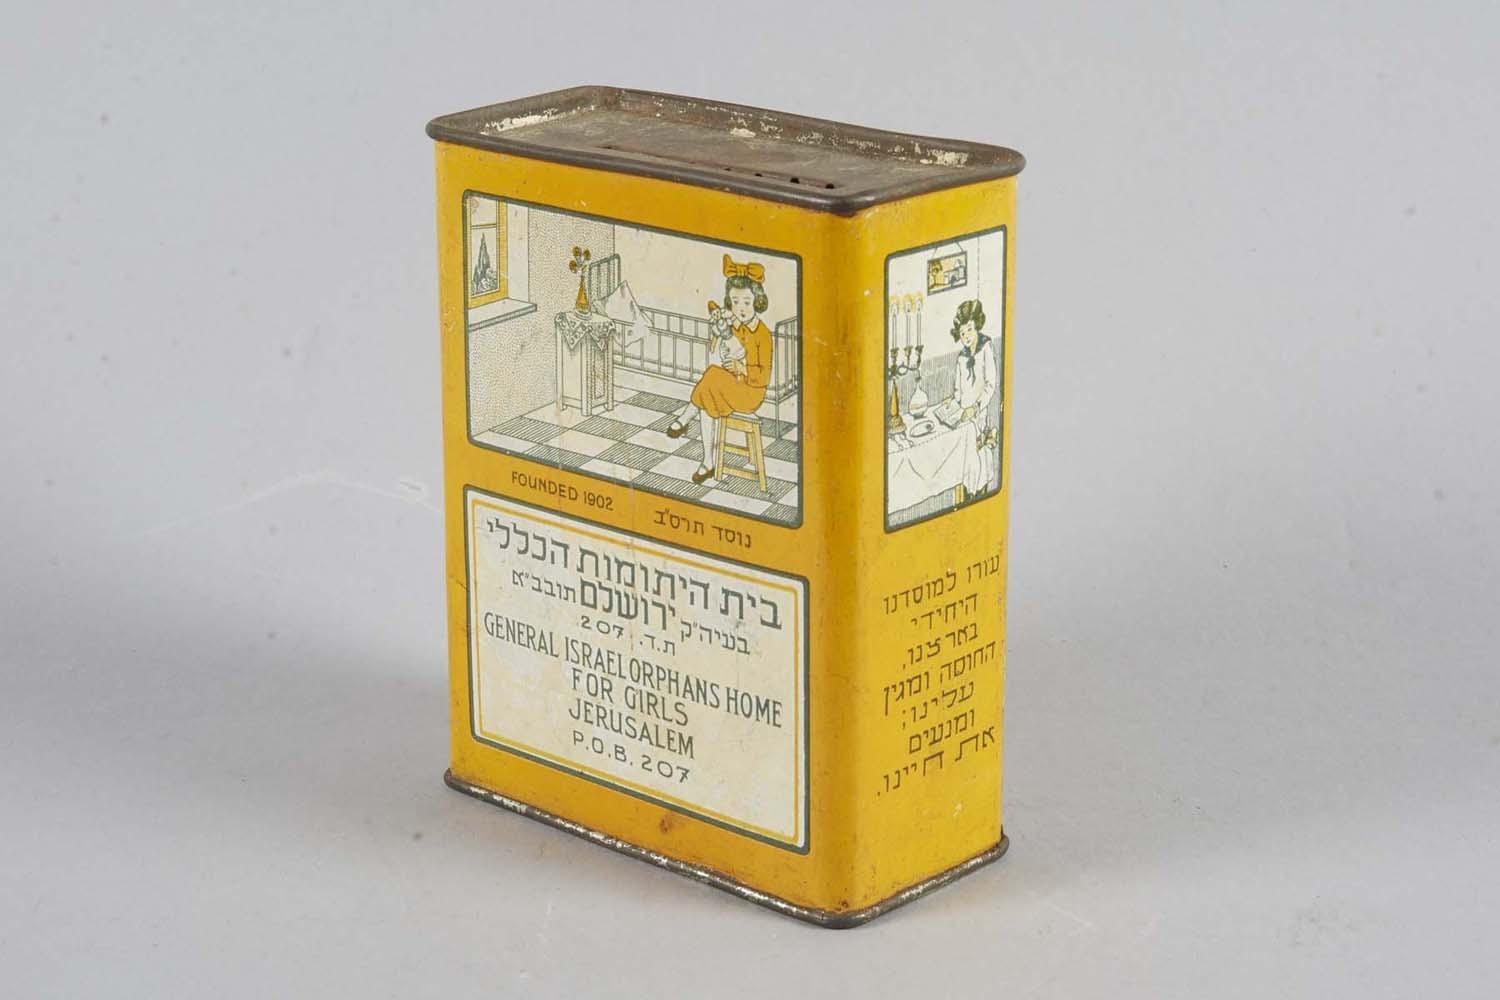 Charity box -Orphanage for the Girls in Jerusalem.
Tin charity box, 